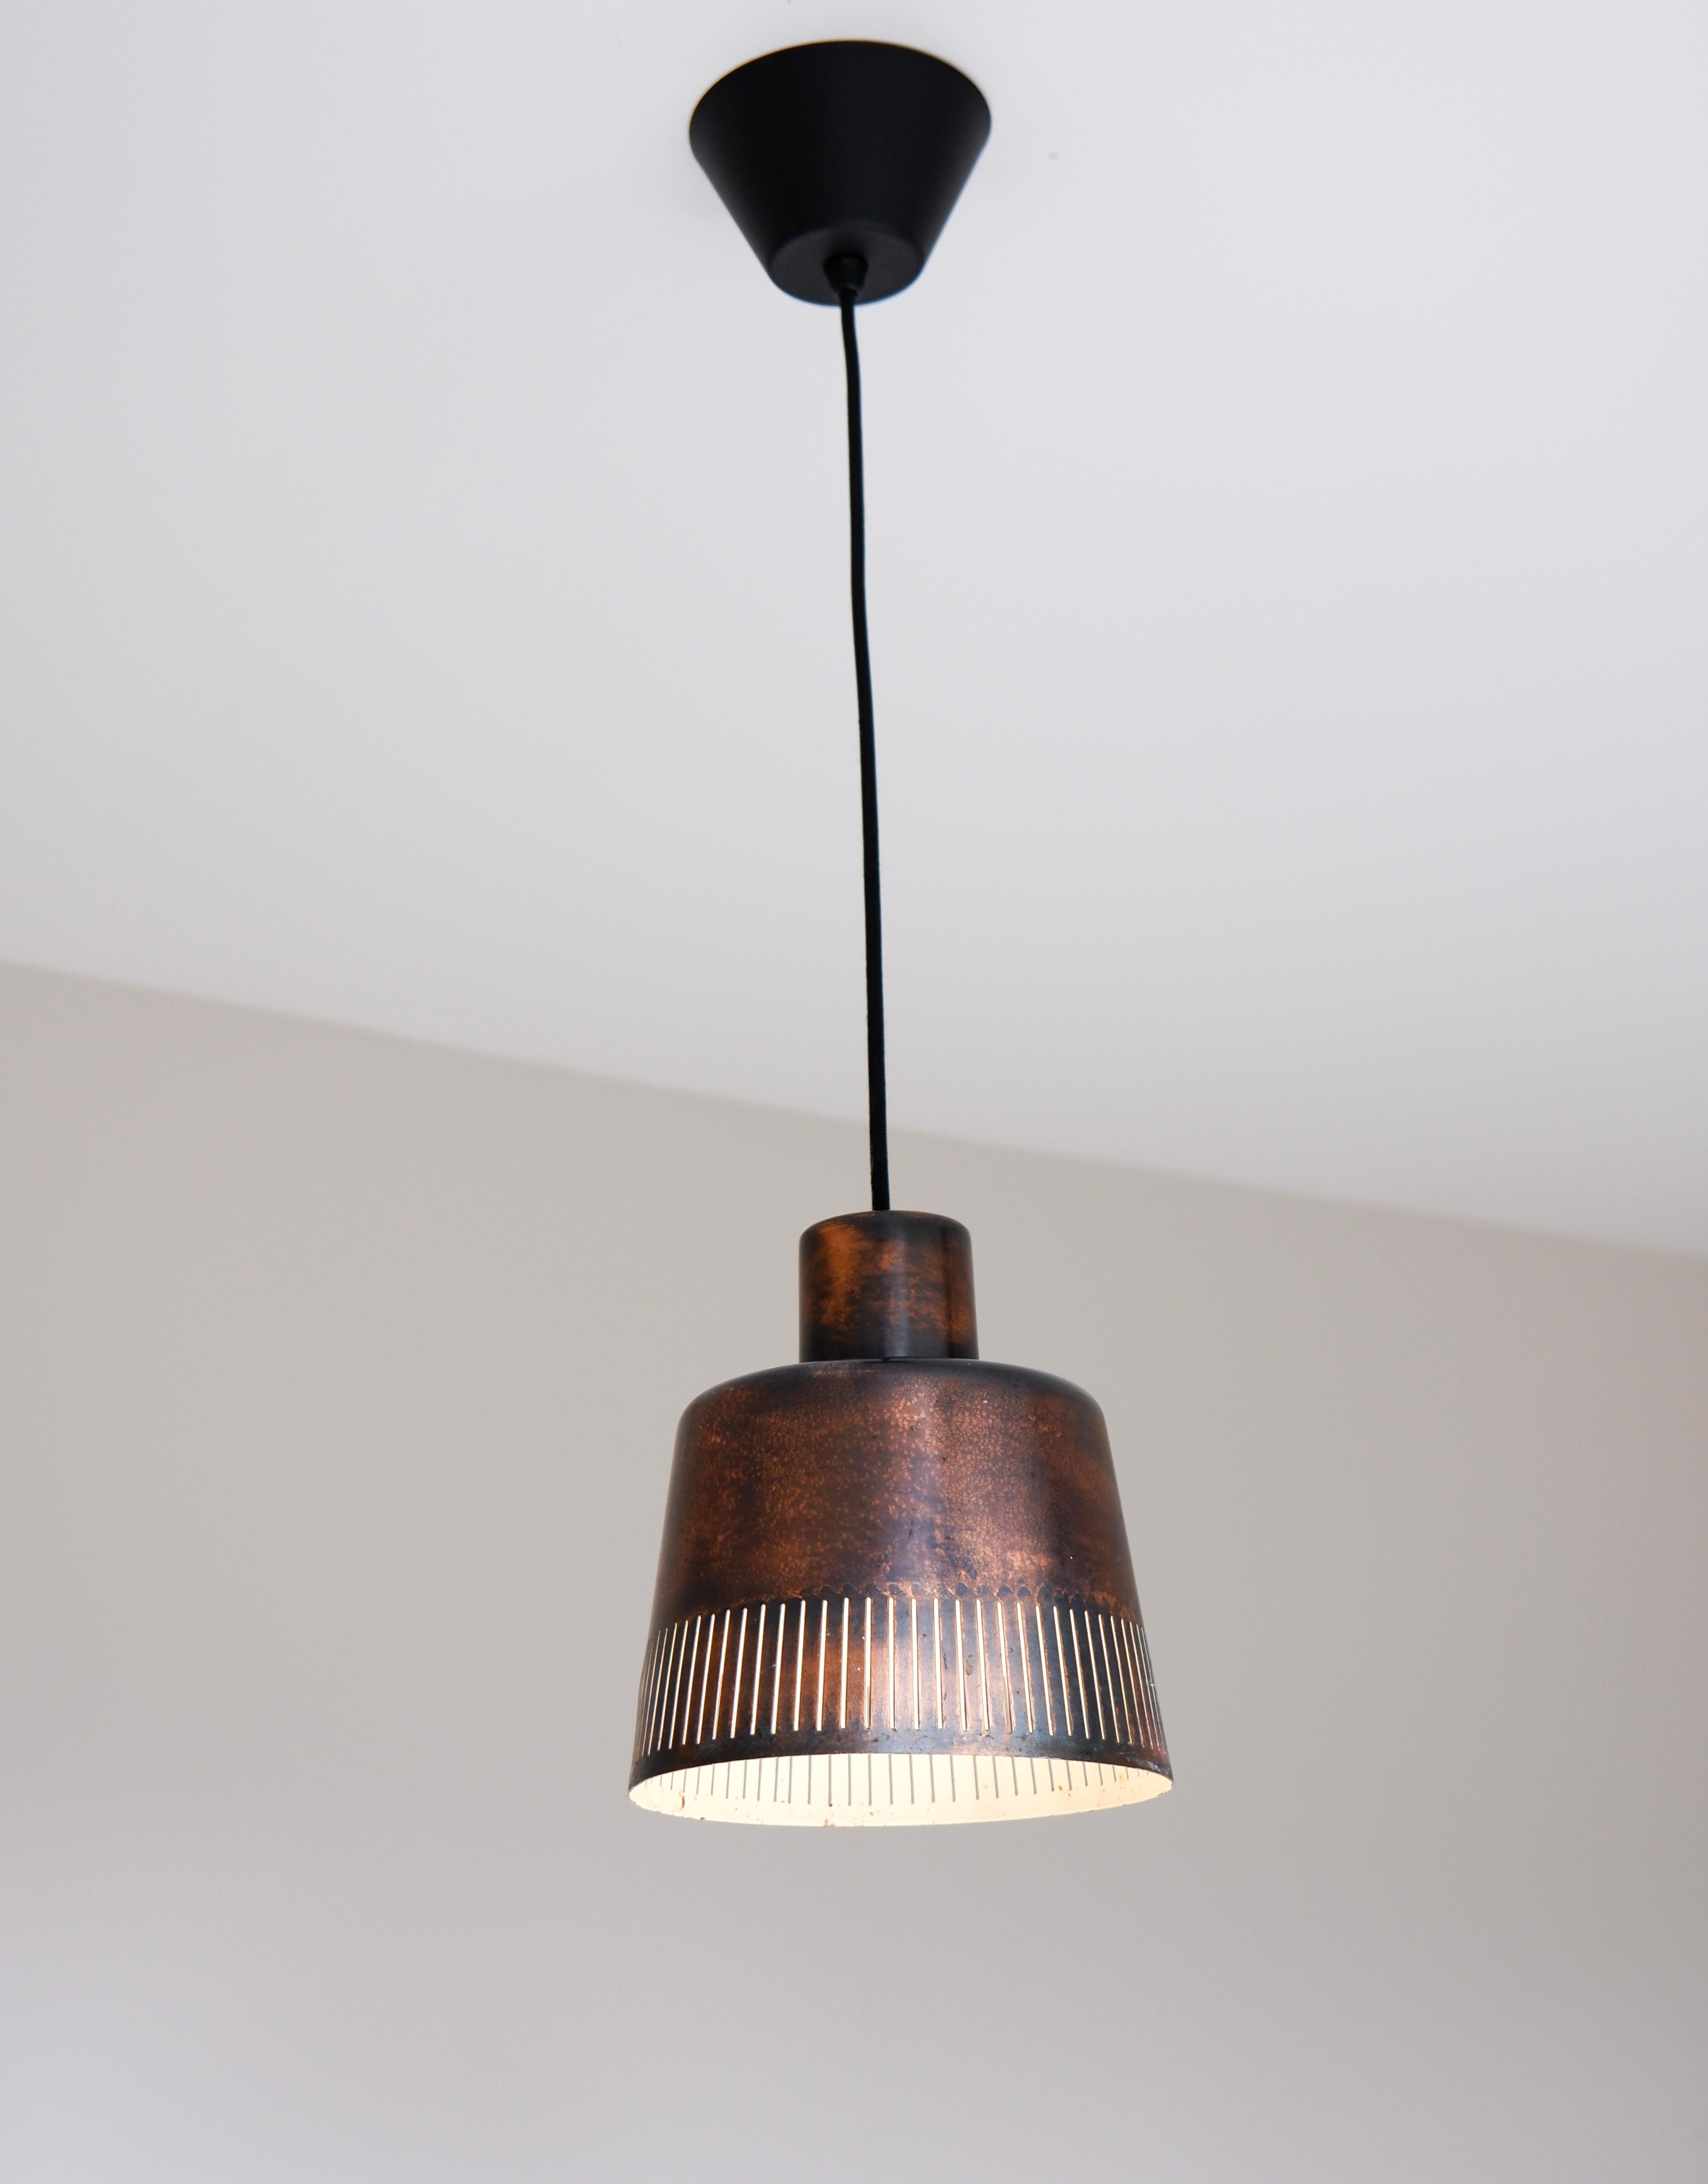 Nice Patinated pendant light design by hans bergström for Atelje Lyktan in the 60's. The light is made in copper and has a really nice patina. Good overhall condition. Hans Bergström is one of the most influencial designer of his time along side